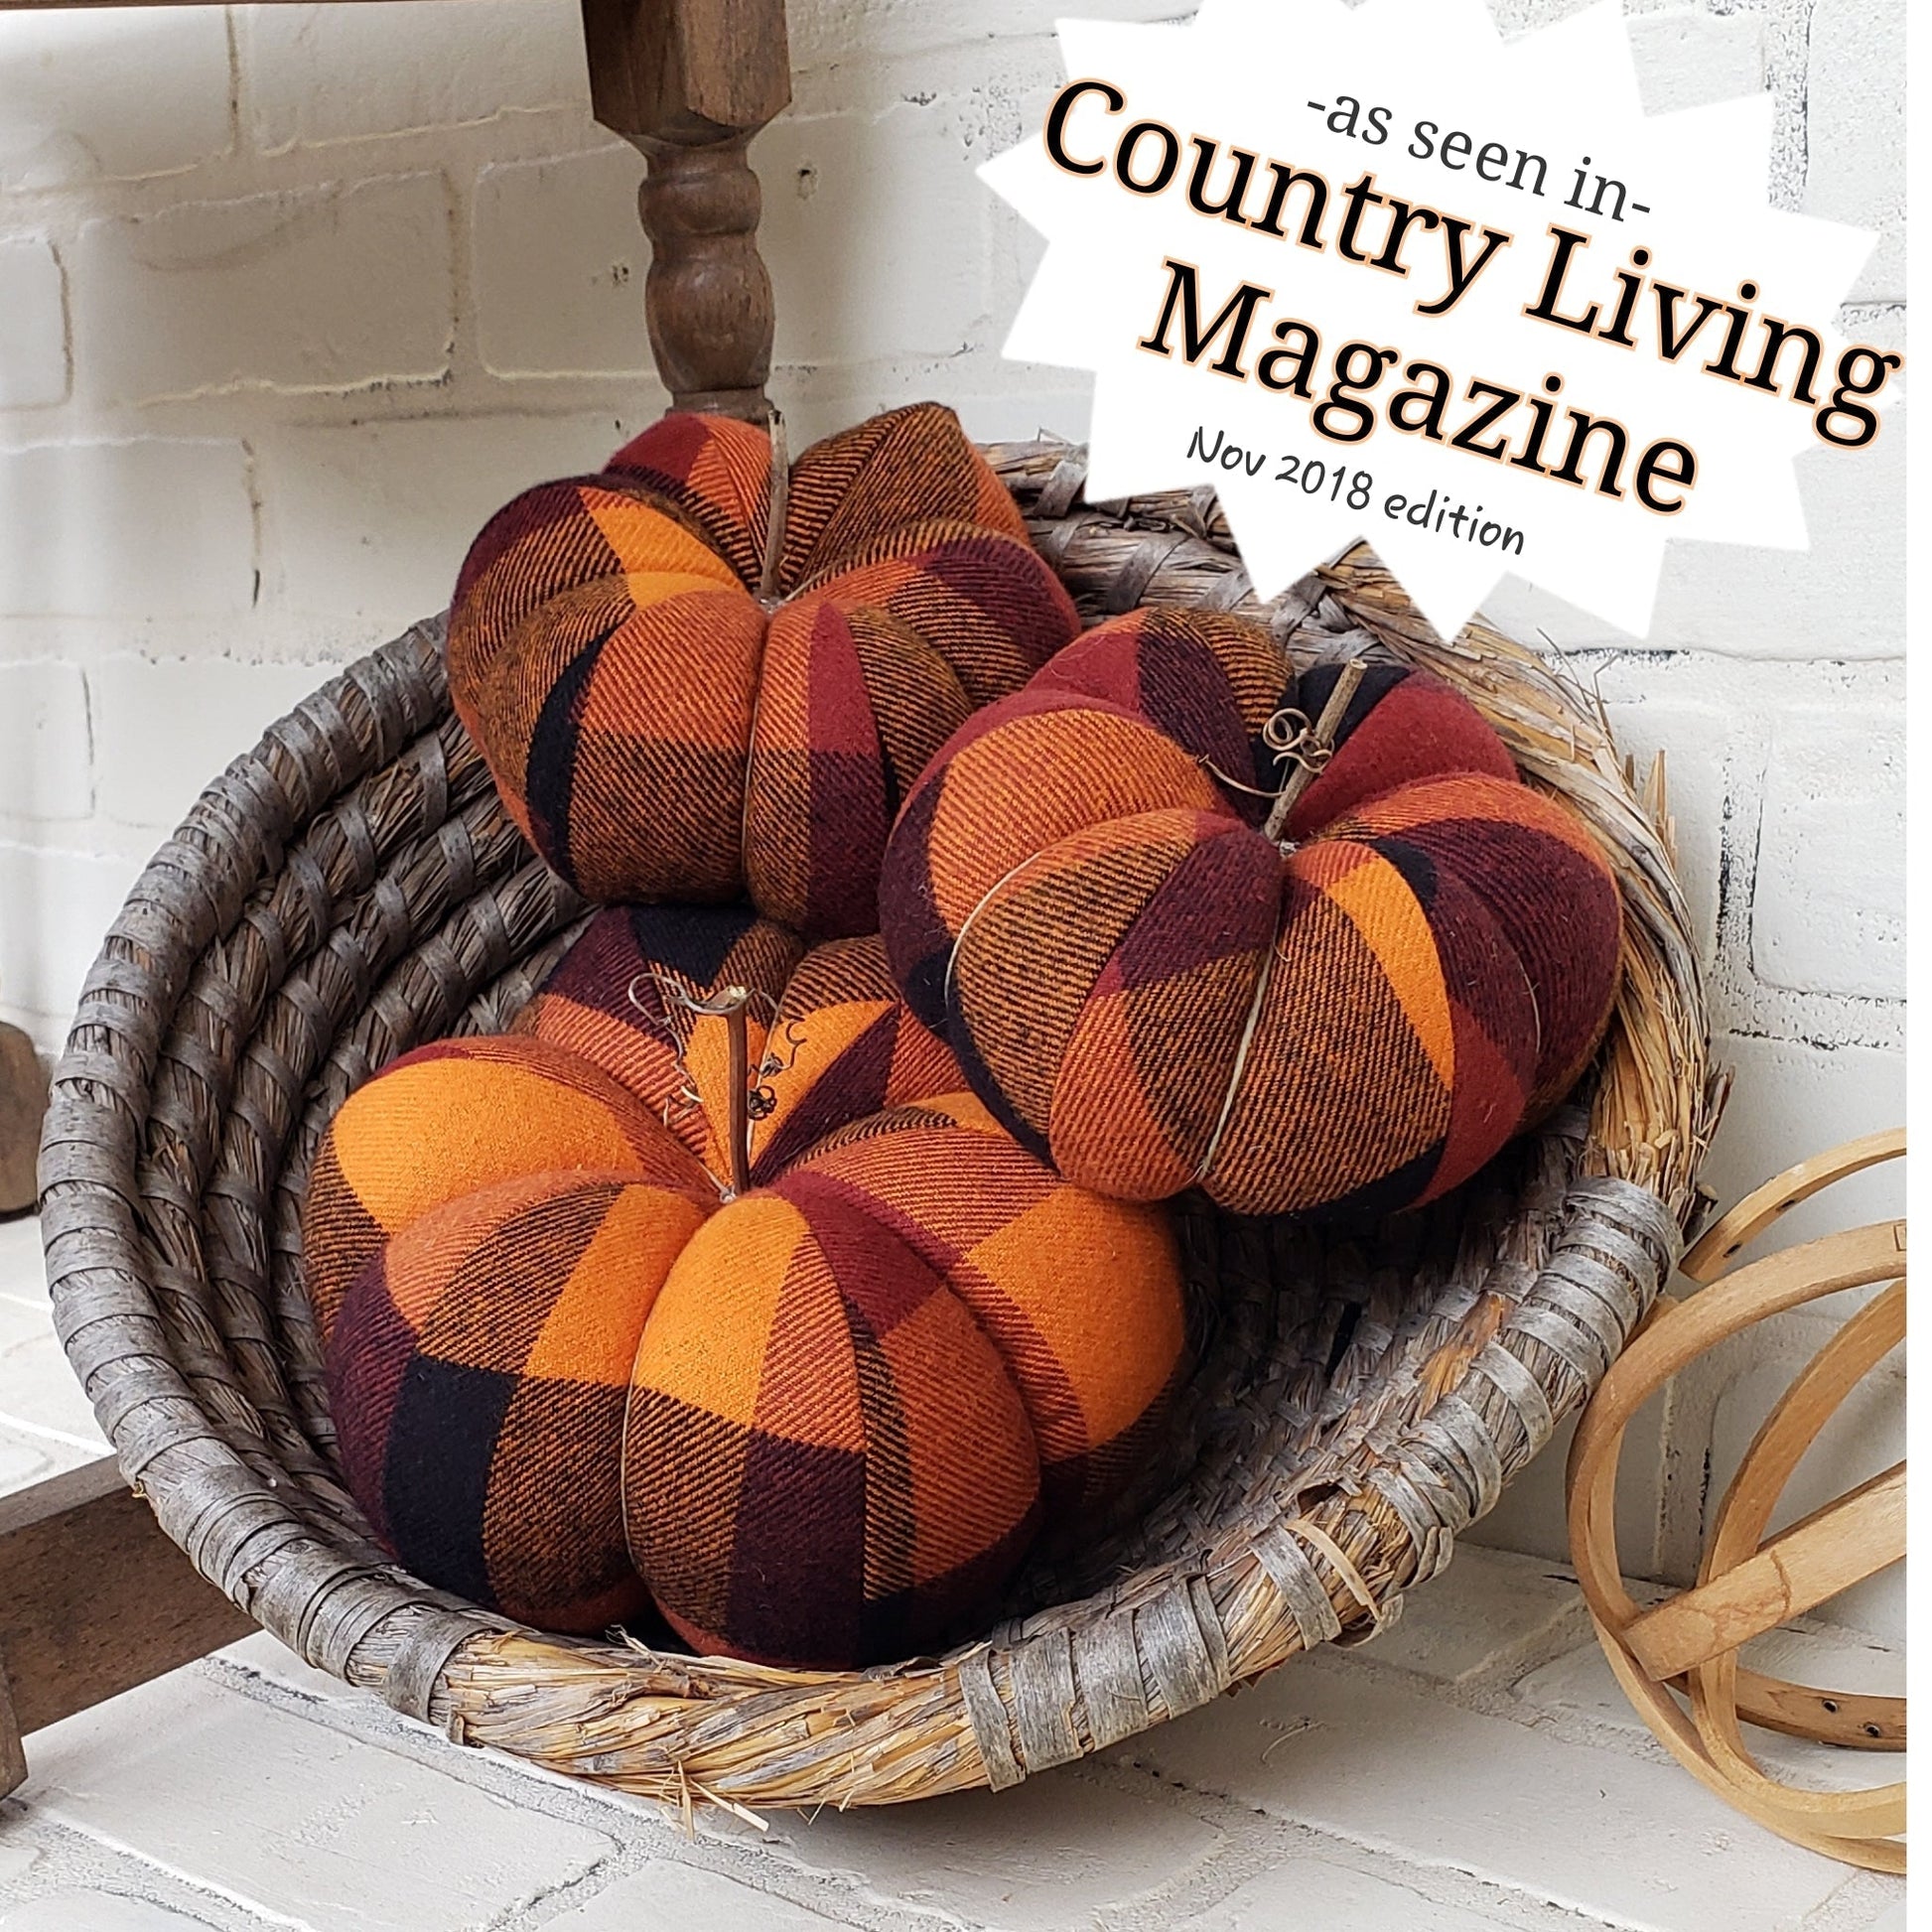 Harvest Plaid fabric home decor pumpkins, as seen in Country Living Magazine (November 2018 edition) displayed in handwoven basket. 